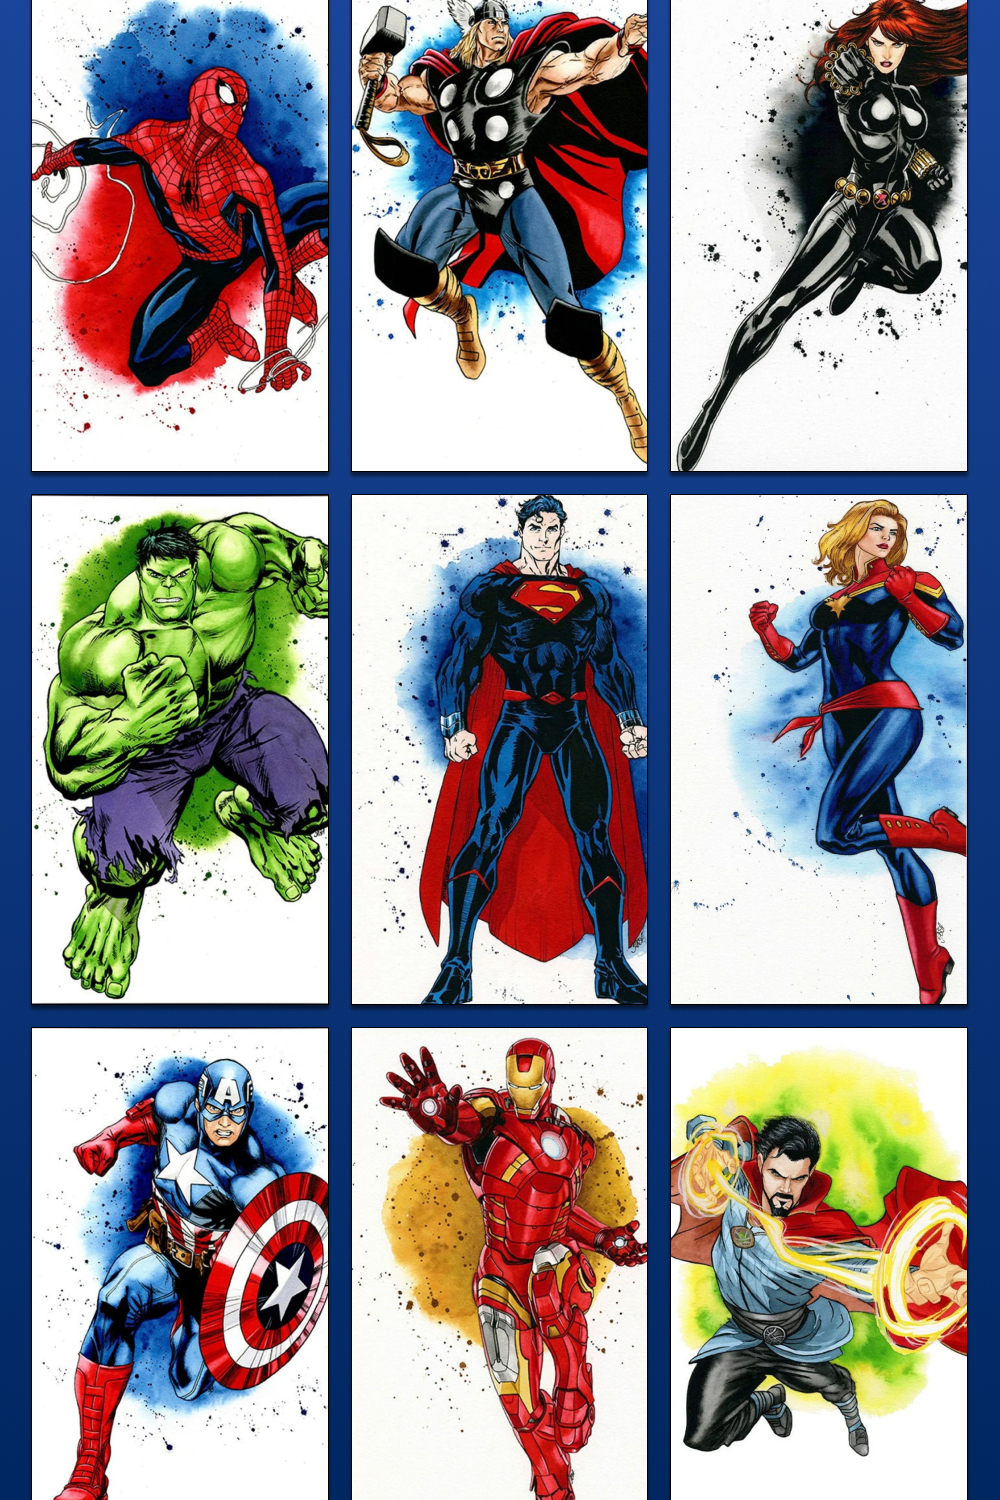 Cool images with superheroes.